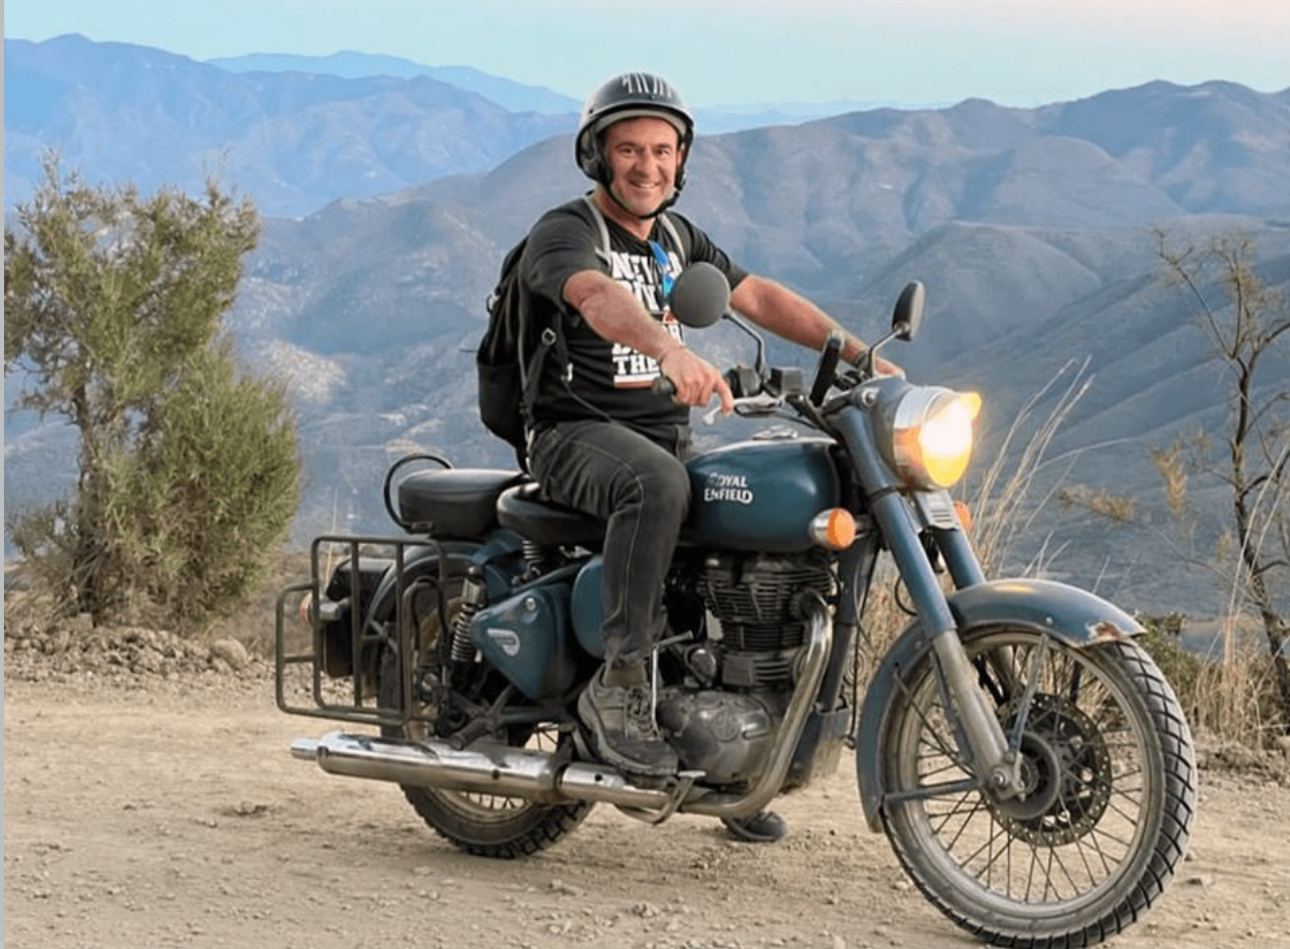 Spanish traveller Carlos Useros Moyano on his motorbike. Carlos is on his mission to visit every country in the world twice